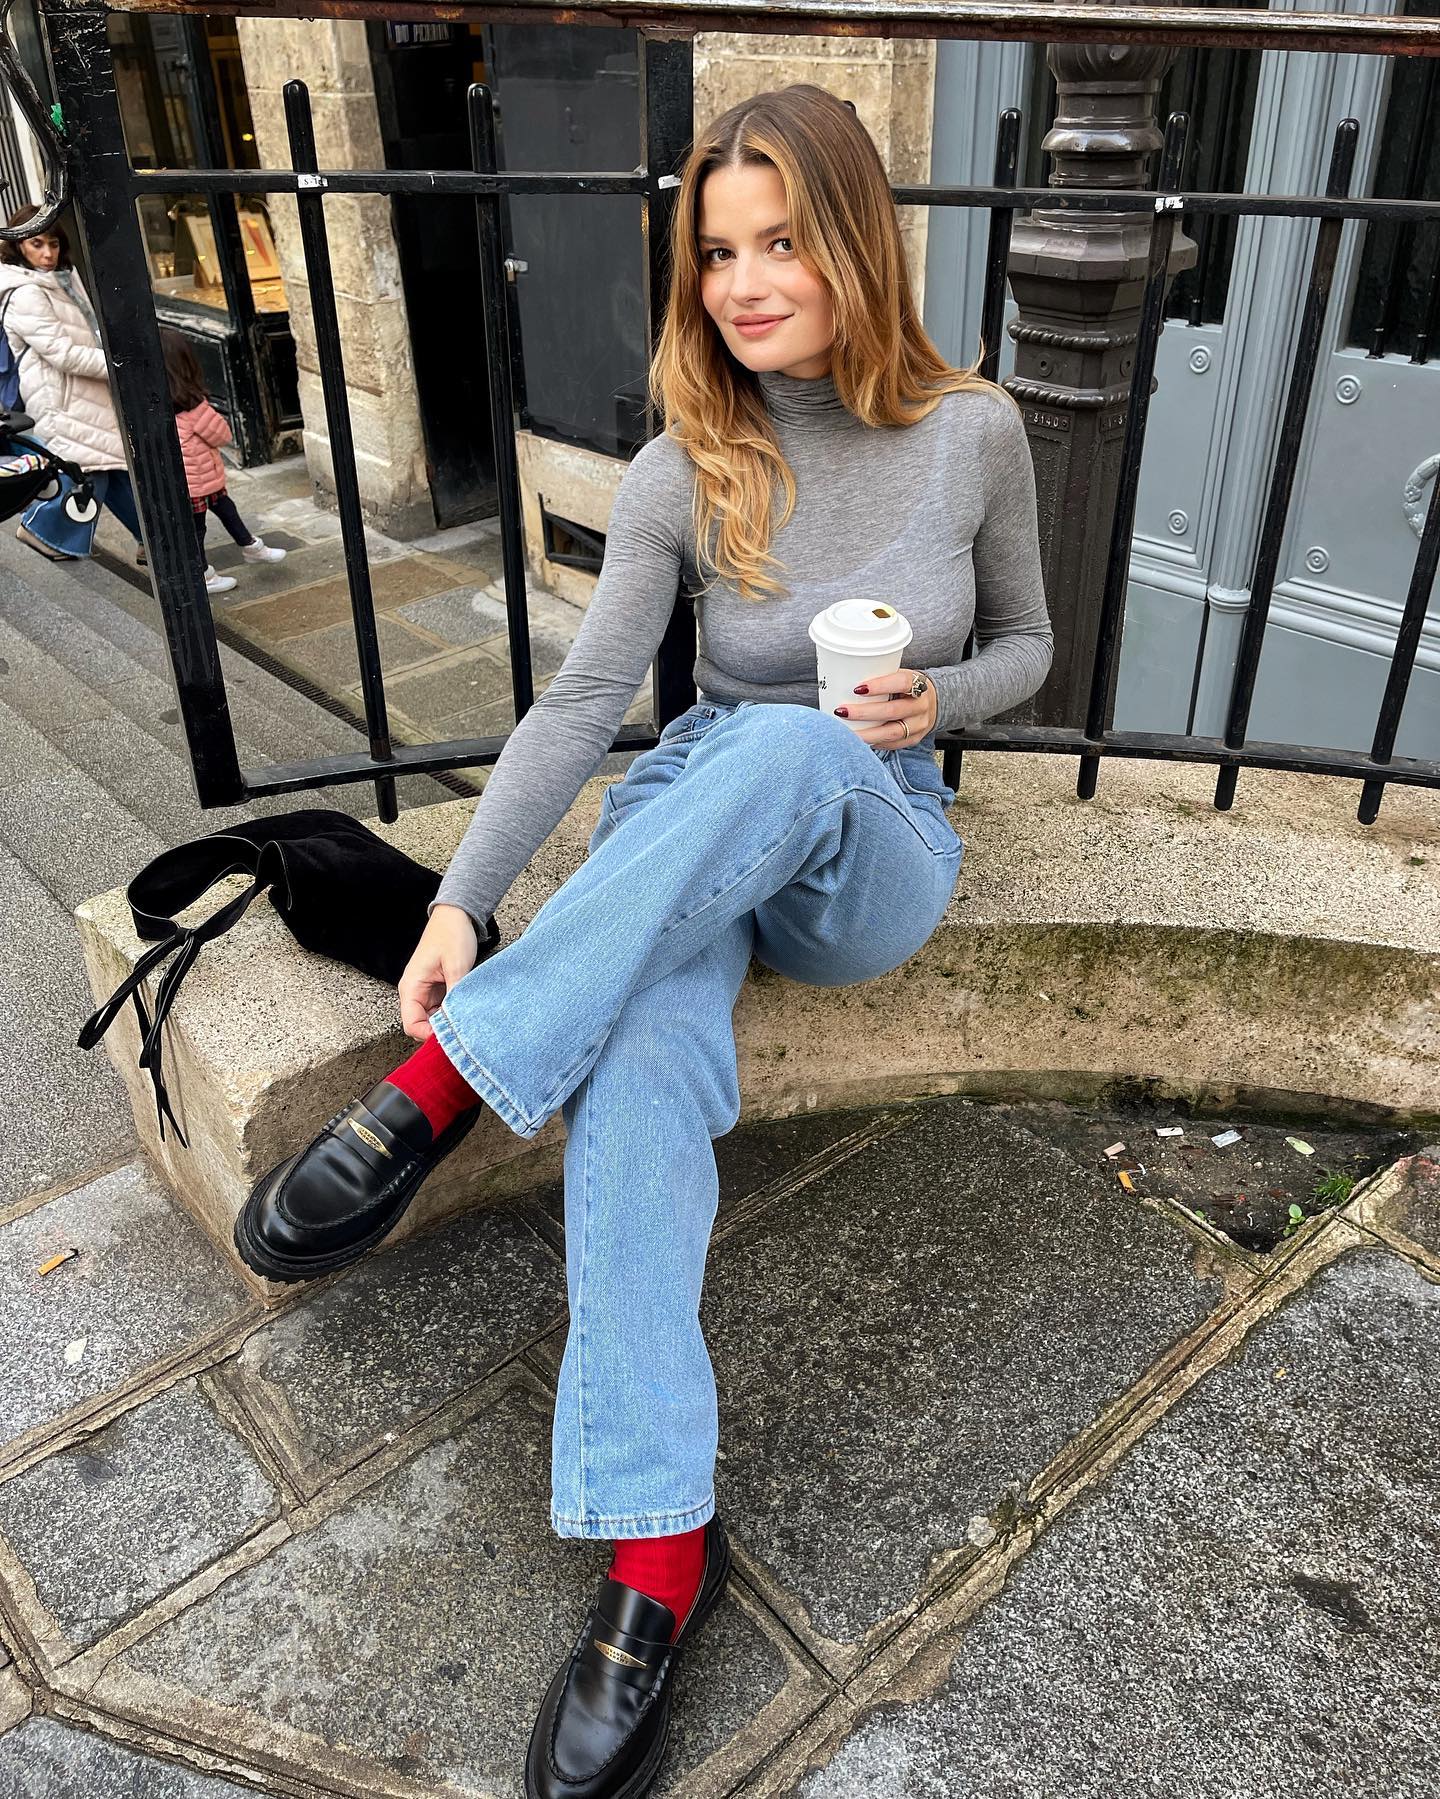 French influencer Sabina Socol sits on the streets of Paris wearing a gray turtleneck, jeans, red socks, and black loafers